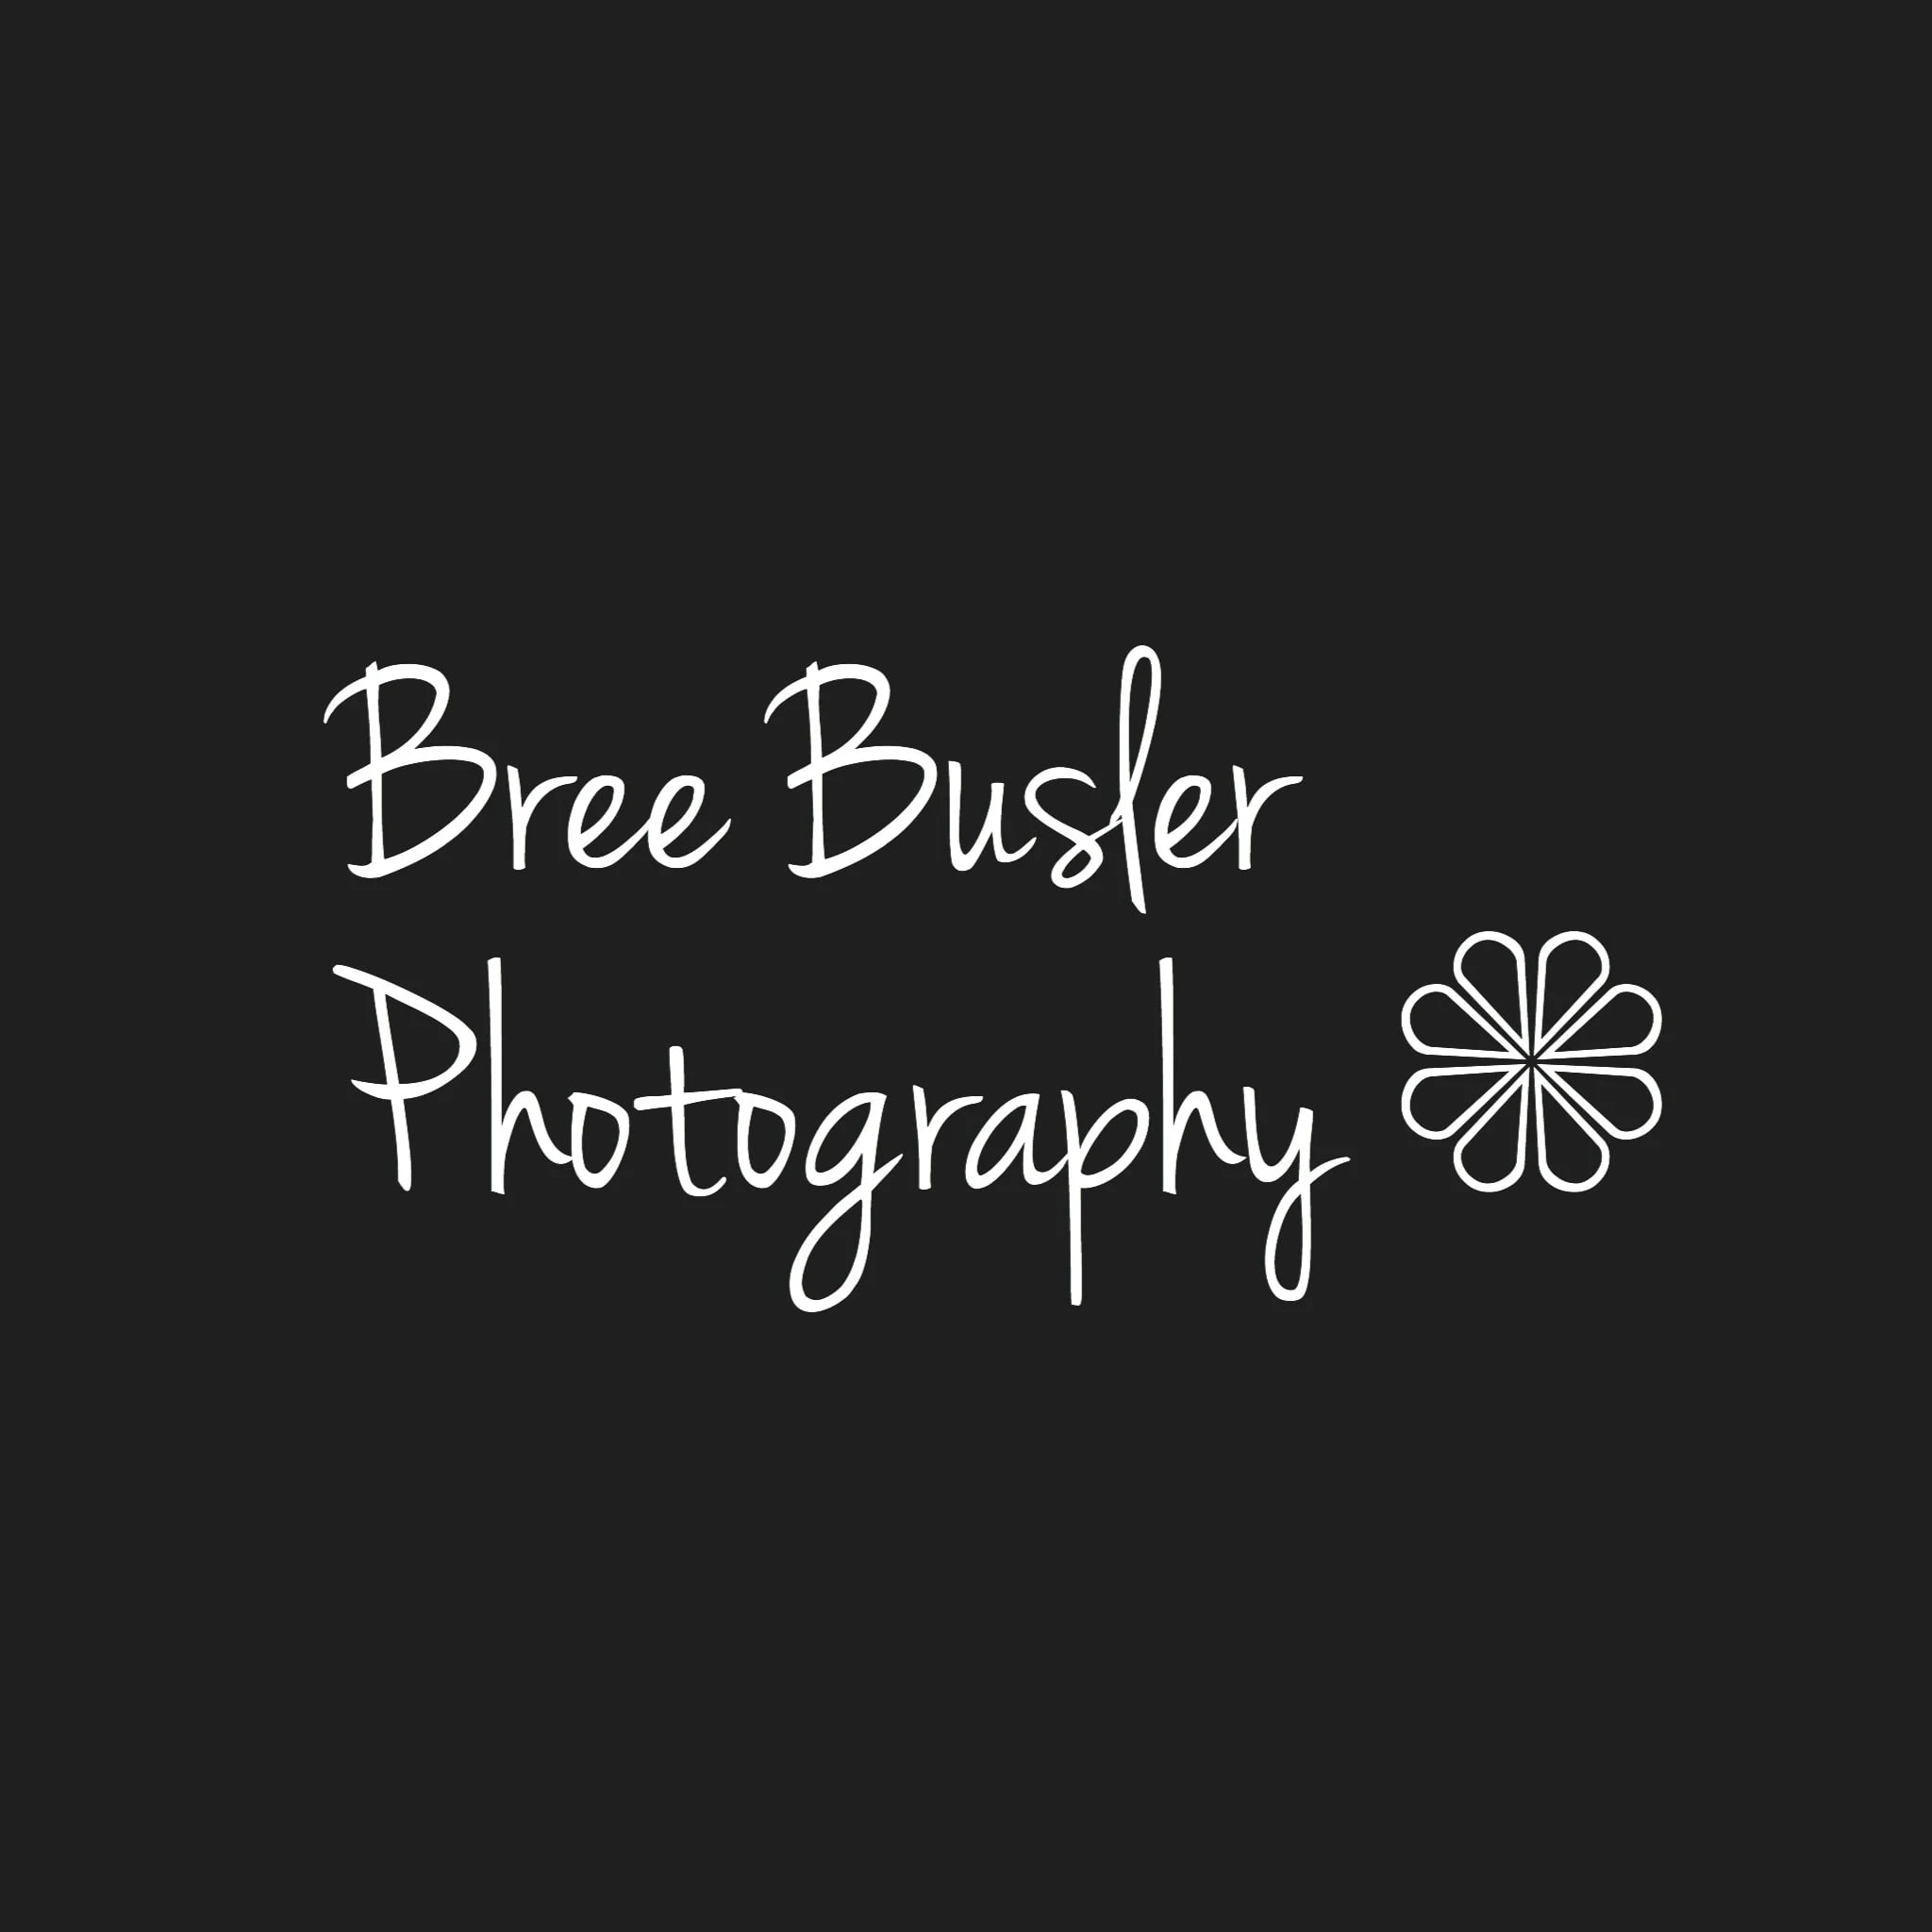 Bree Busler Photography